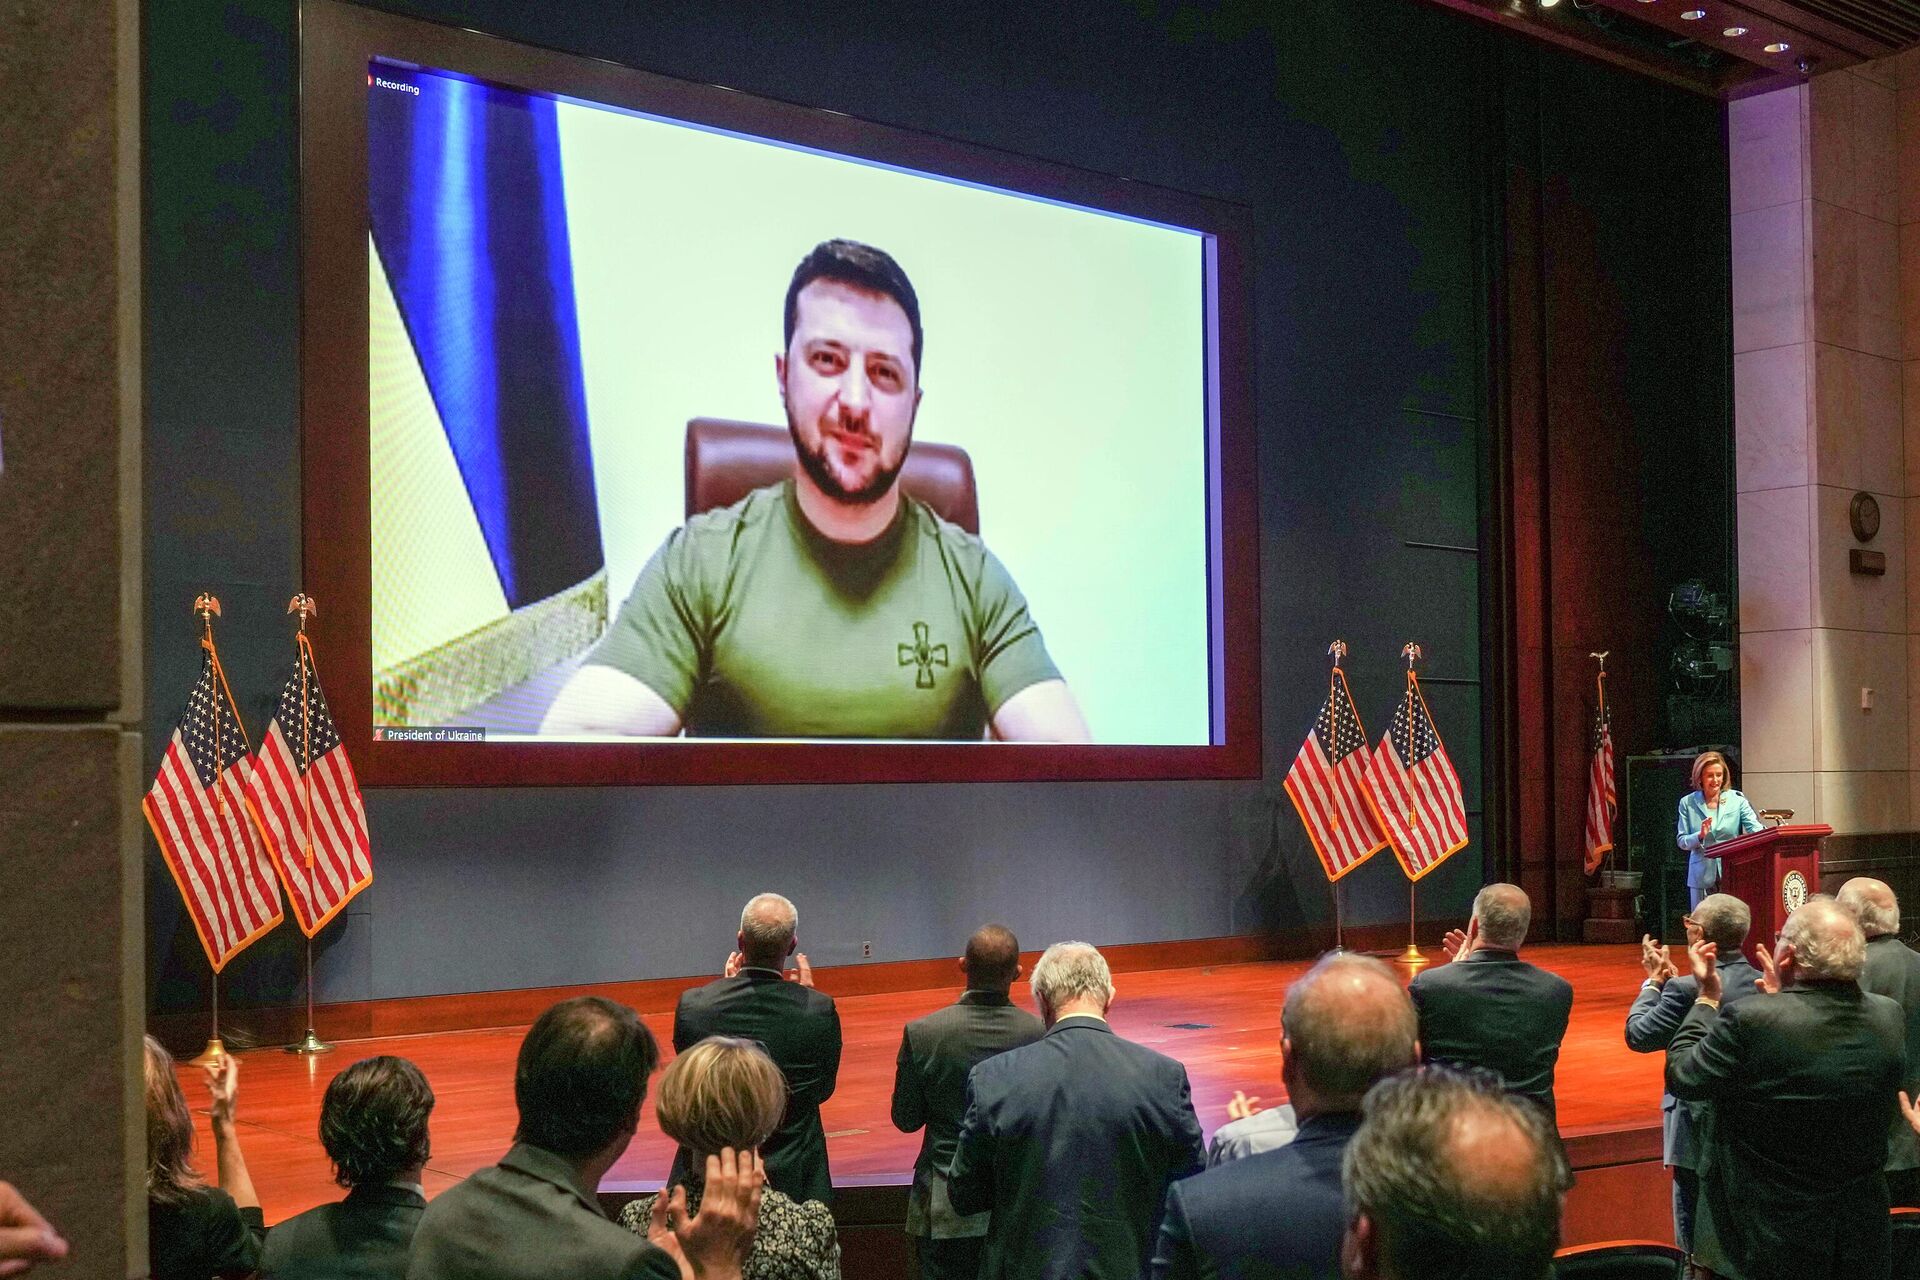 FILE - Members of Congress give Ukraine President Volodymyr Zelensky a standing ovation before he speaks in a virtual address to Congress in the U.S. Capitol Visitors Center Congressional Auditorium in Washington, on Wednesday, March 16, 2022 - Sputnik International, 1920, 17.08.2022